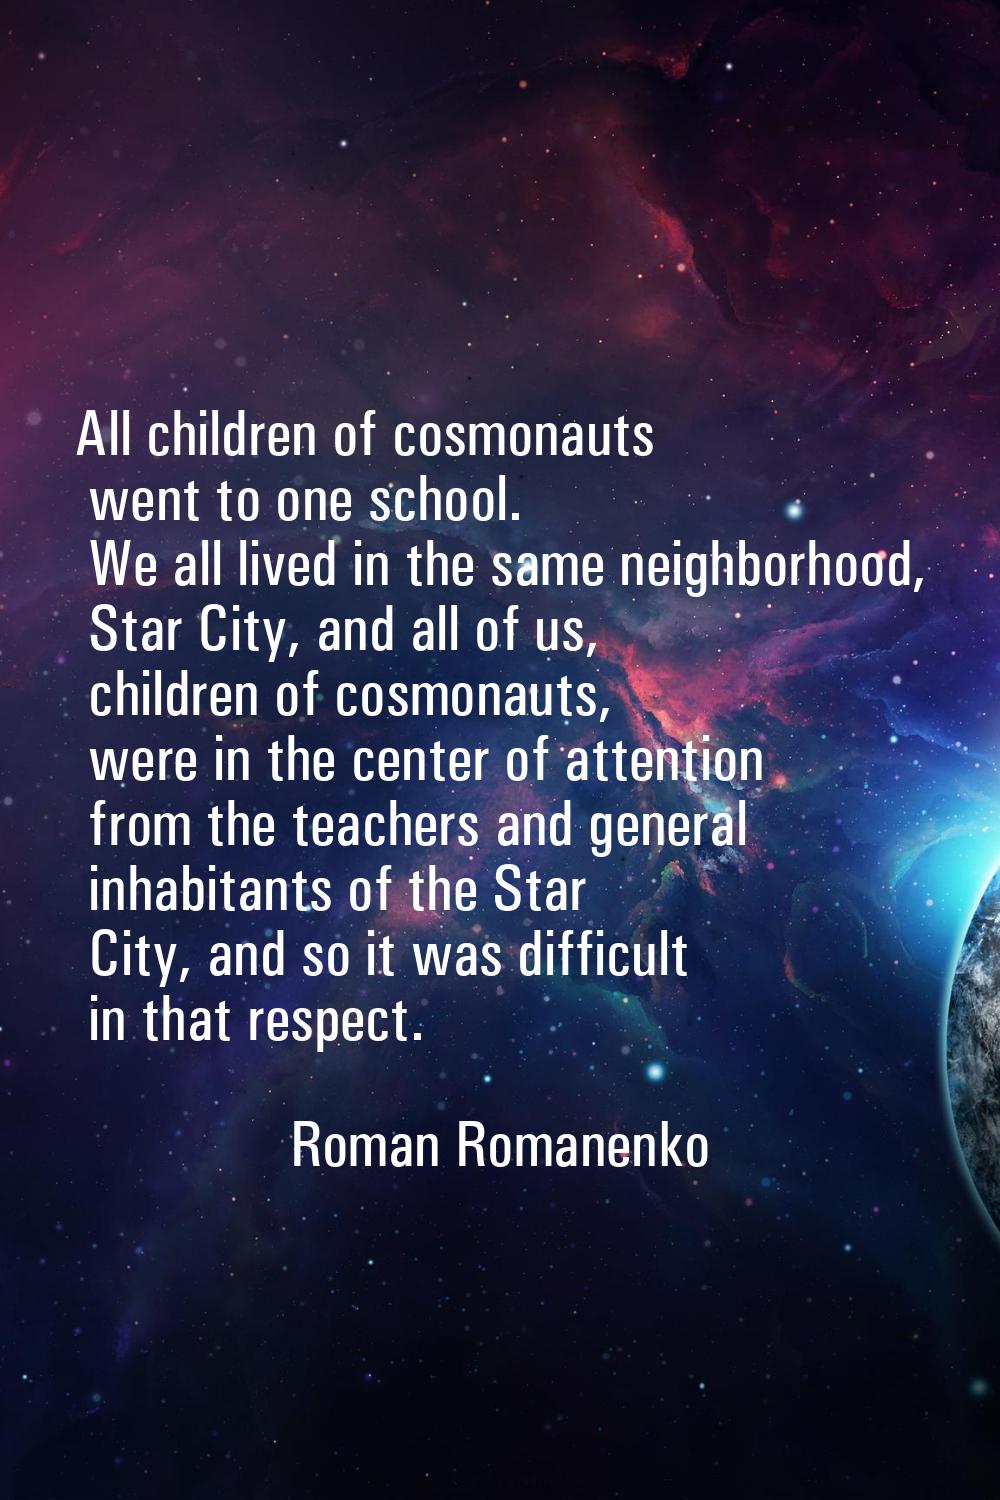 All children of cosmonauts went to one school. We all lived in the same neighborhood, Star City, an